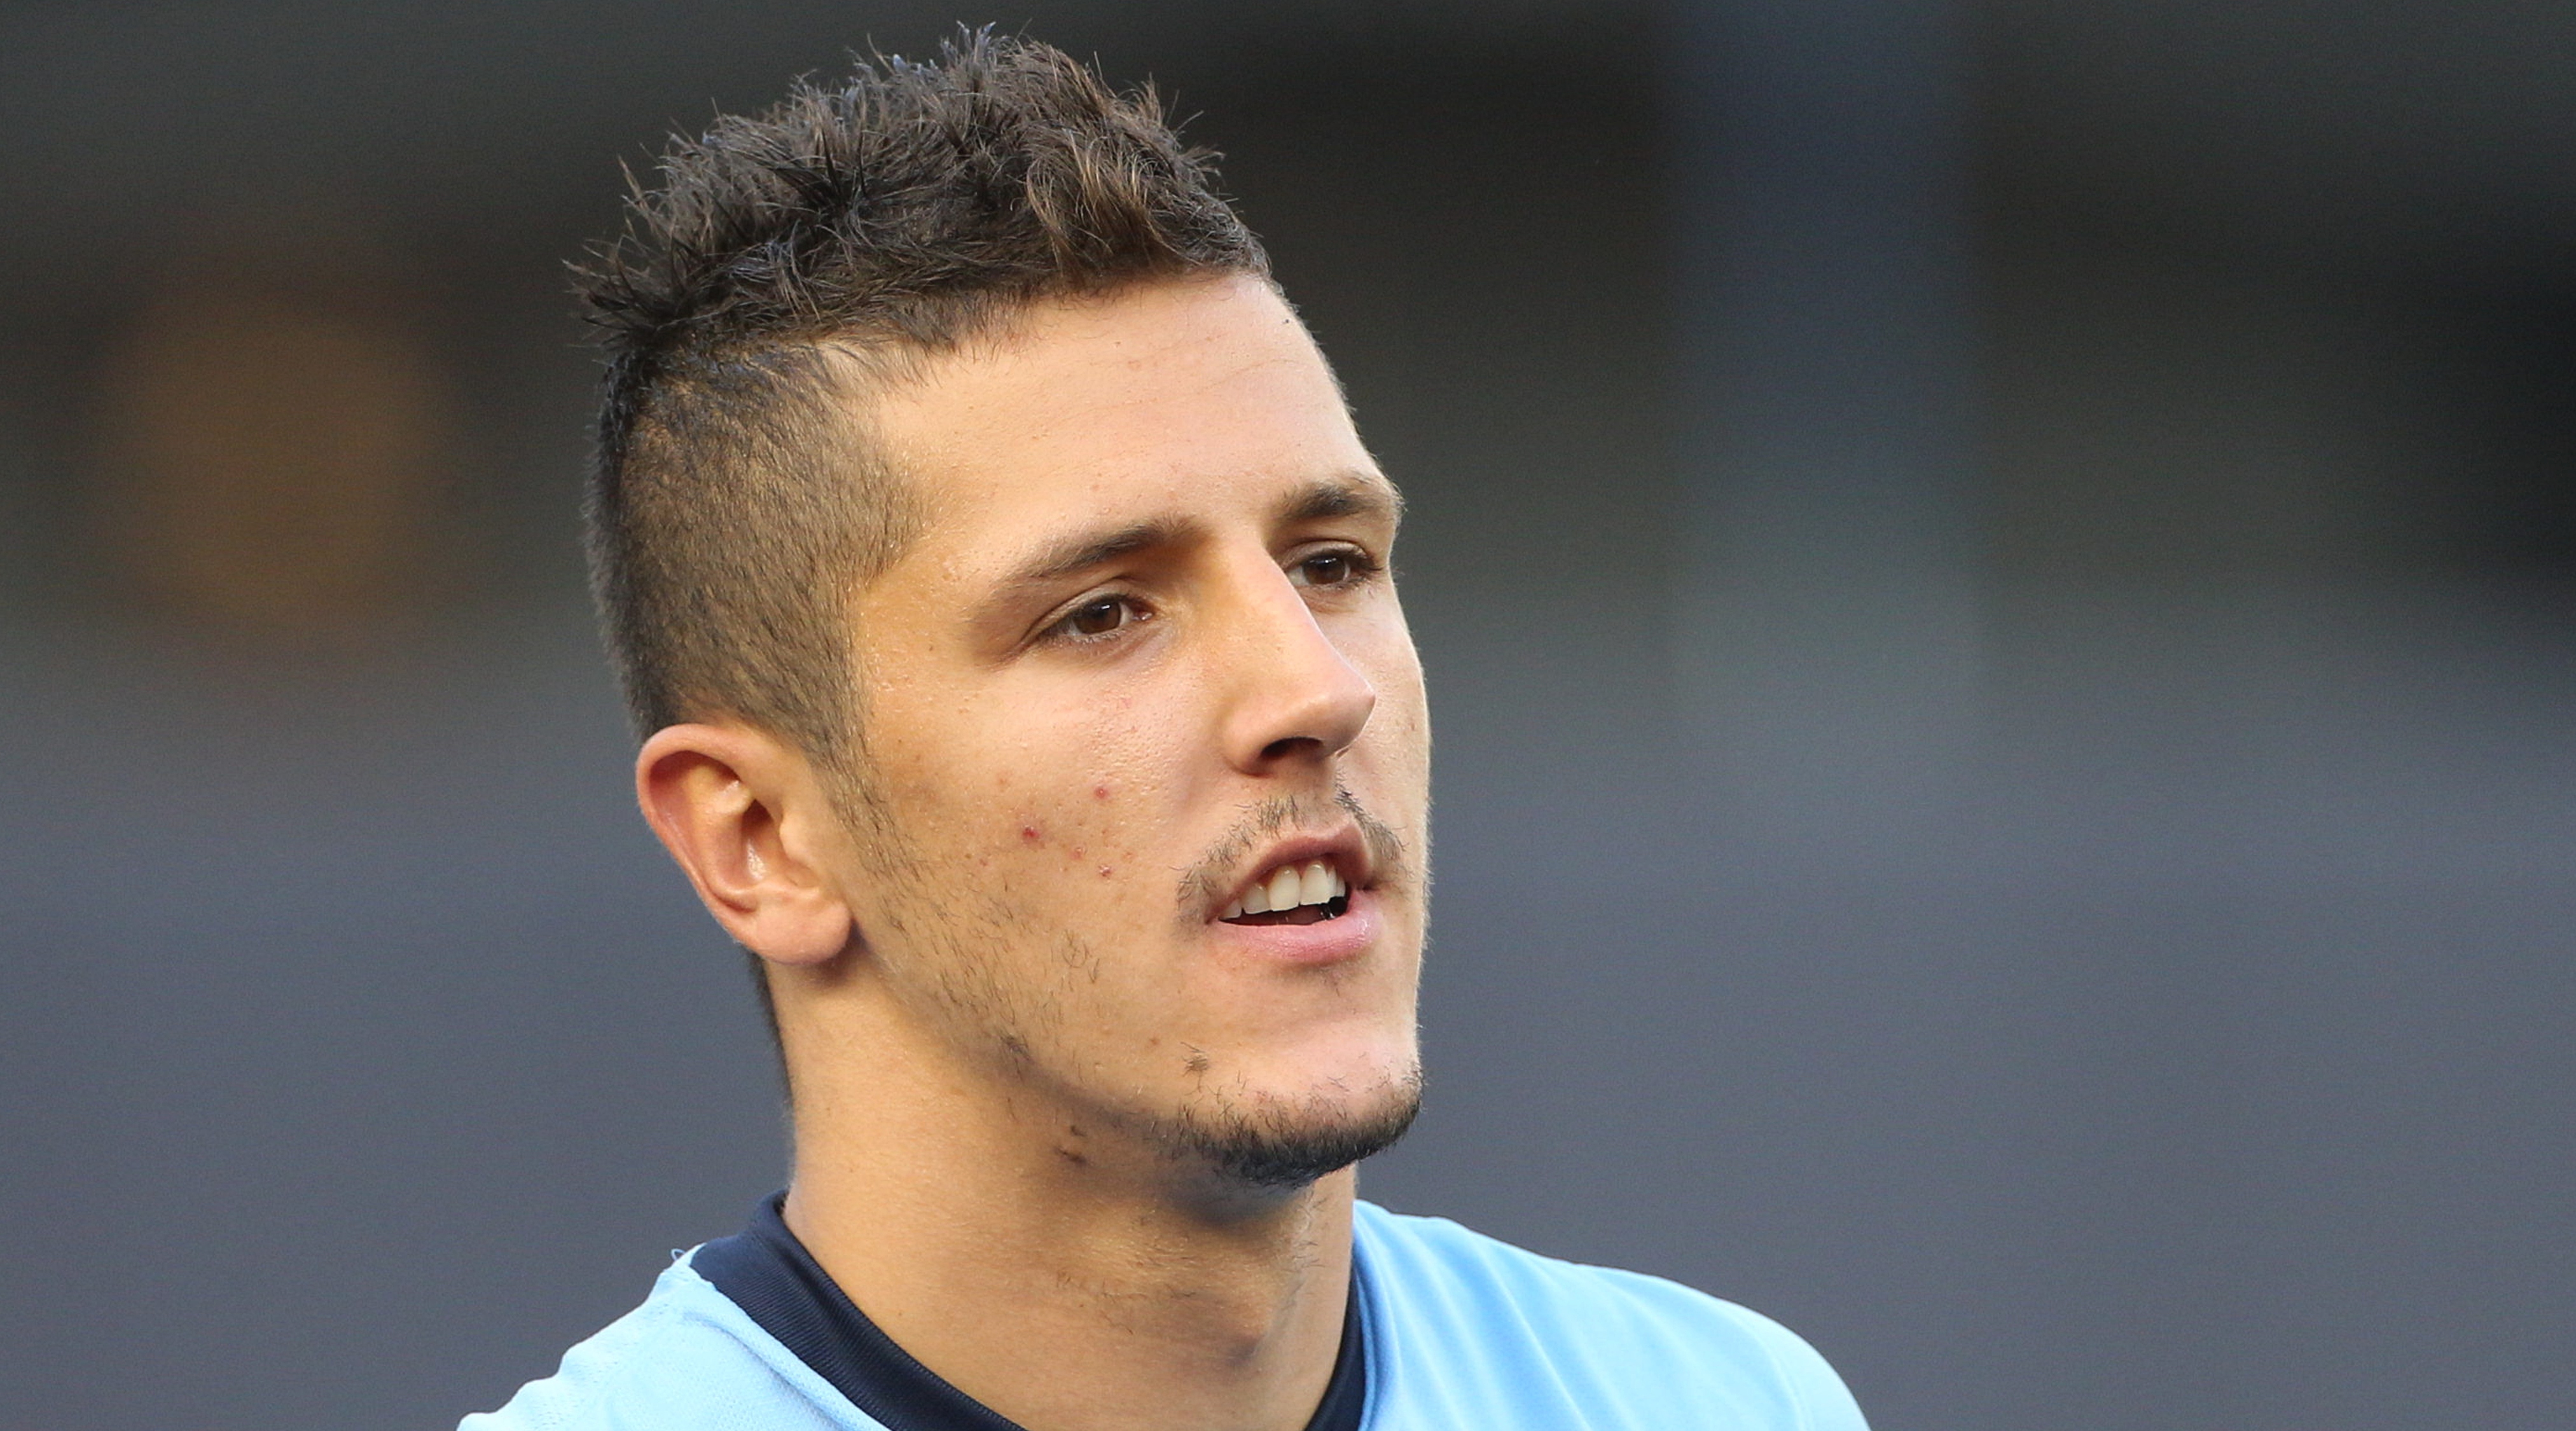 Stevan Jovetic, Manchester City, during the Manchester City Vs Liverpool FC Guinness International Champions Cup match at Yankee Stadium, The Bronx, New York, USA. 30th July 2014. Photo Tim Clayton (Photo by Tim Clayton/Corbis via Getty Images)